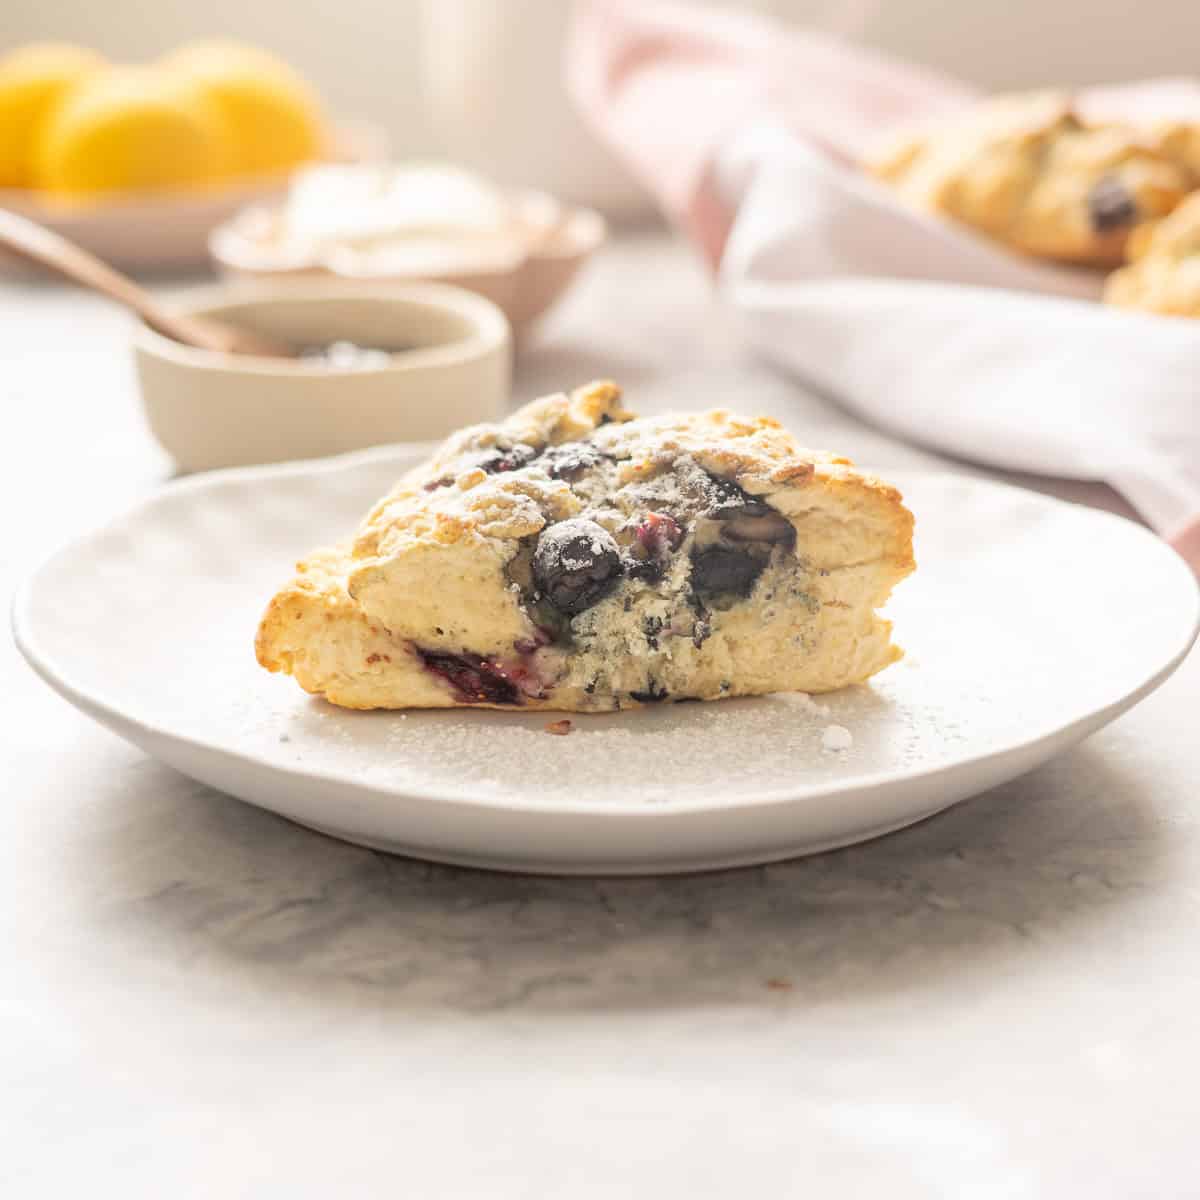 A triangular shaped blueberry scone on a side plate with bowls of cream, sauce and lemons in the background.